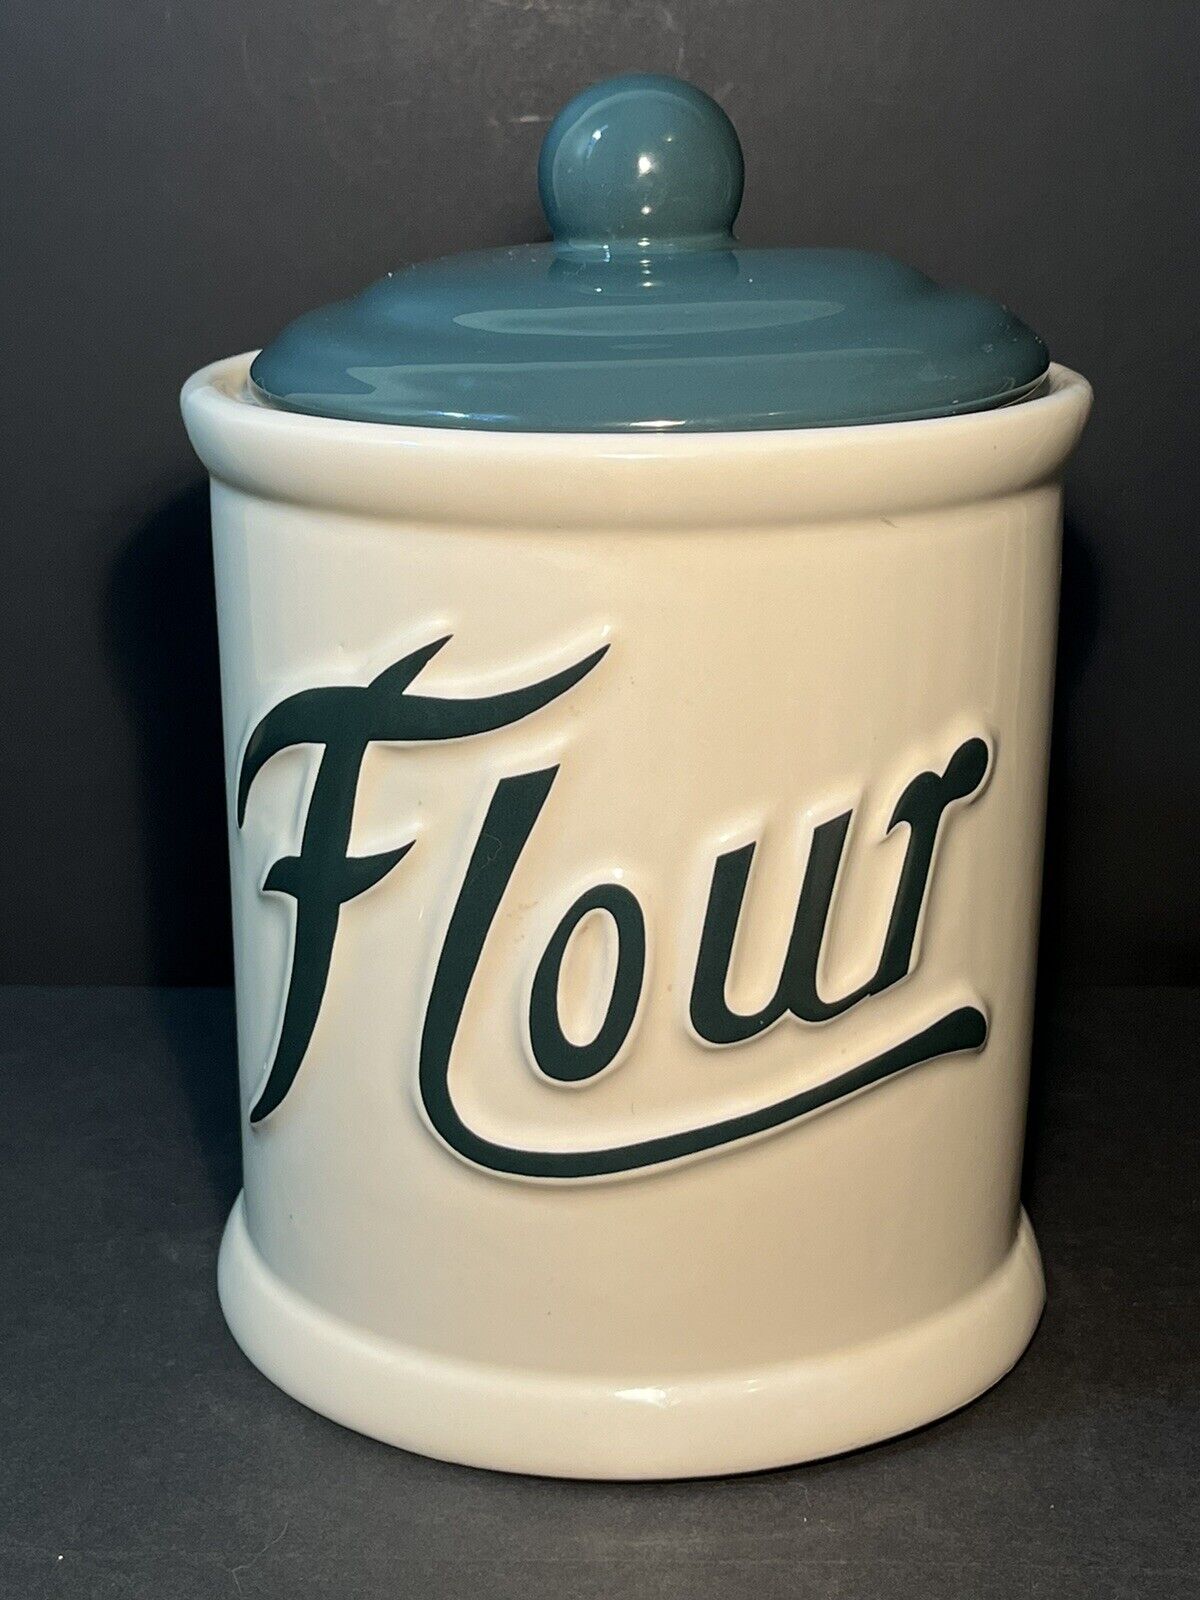 Vtg Himark Ceramic Flour Canister Green & White 9.5” Kitchen Storage Replacement